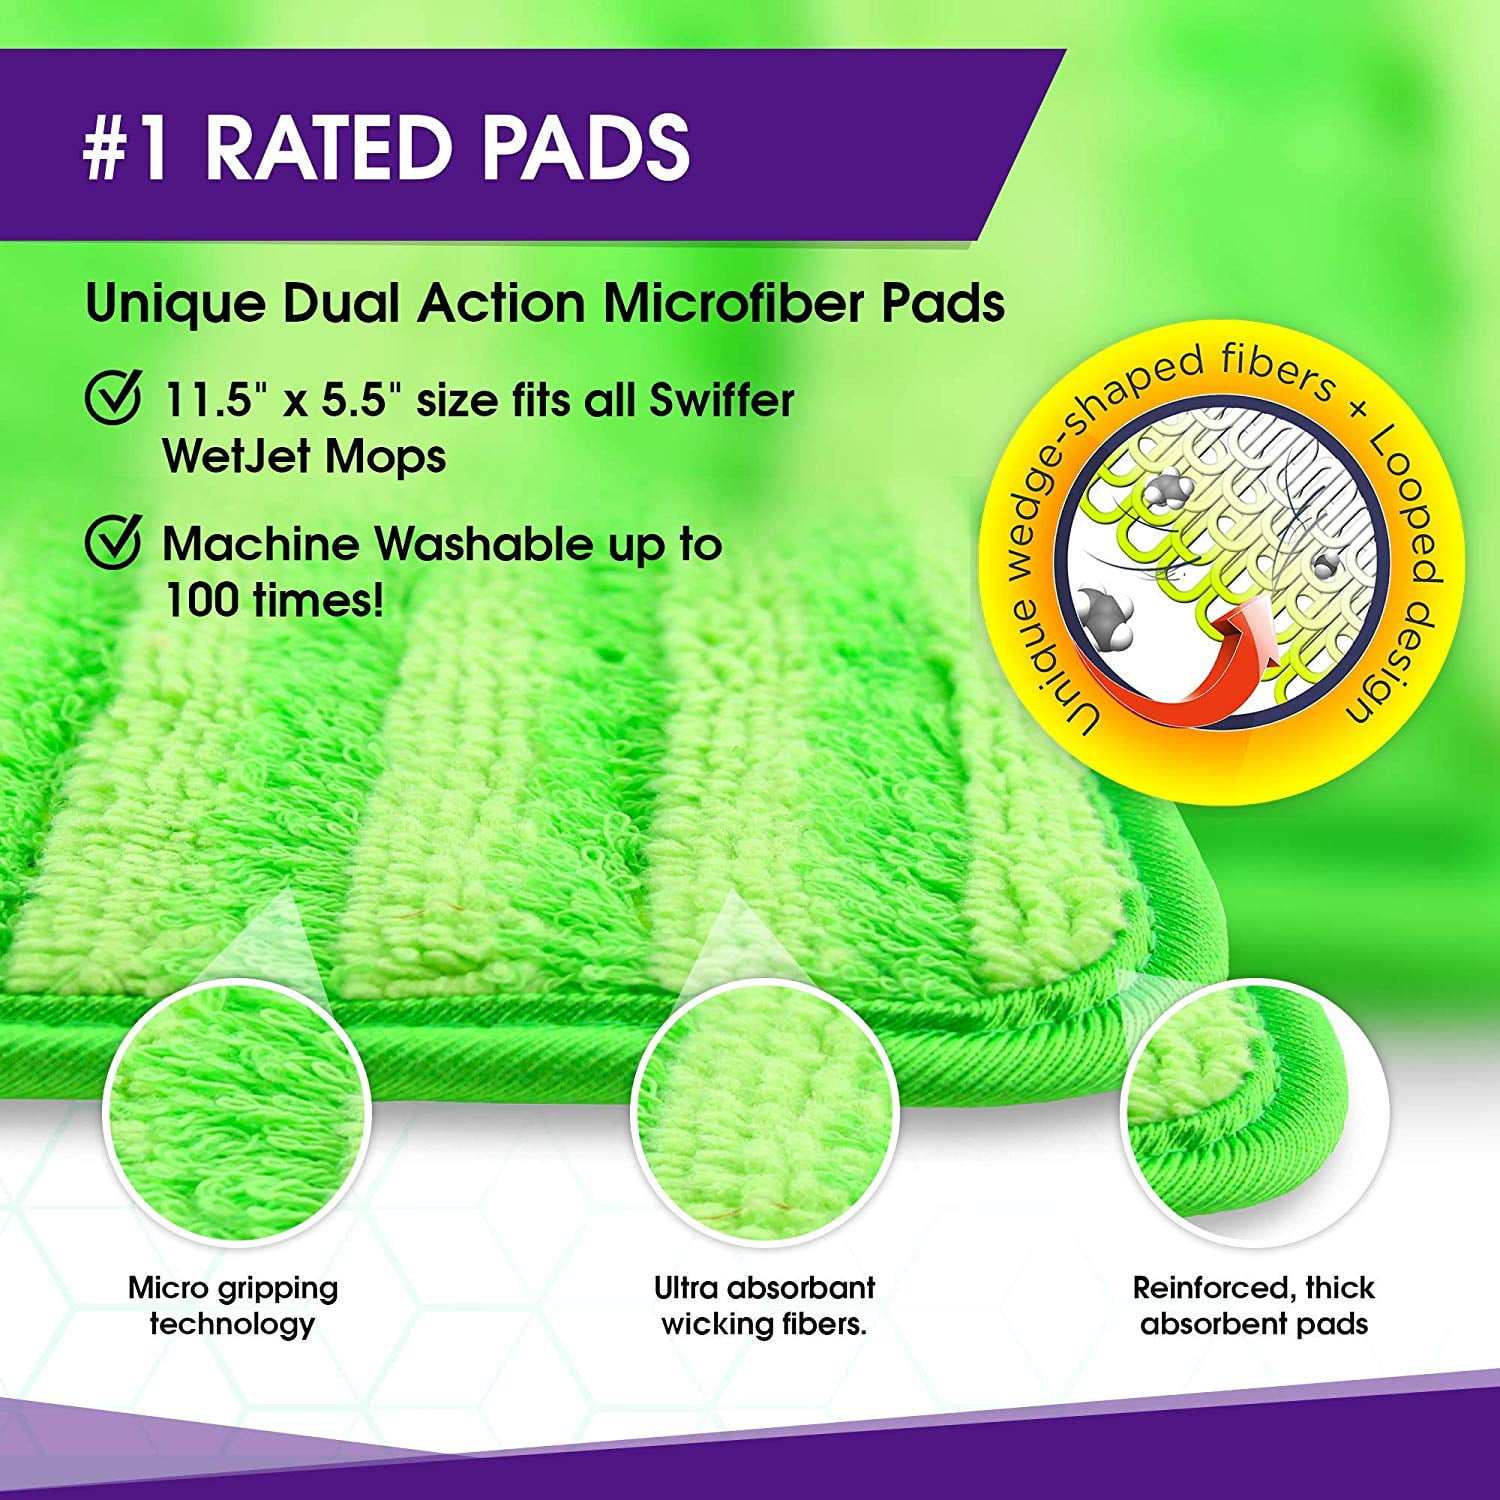 Turbo Mops Reusable Floor Mop Pads - Pack of 4 Machine Washable